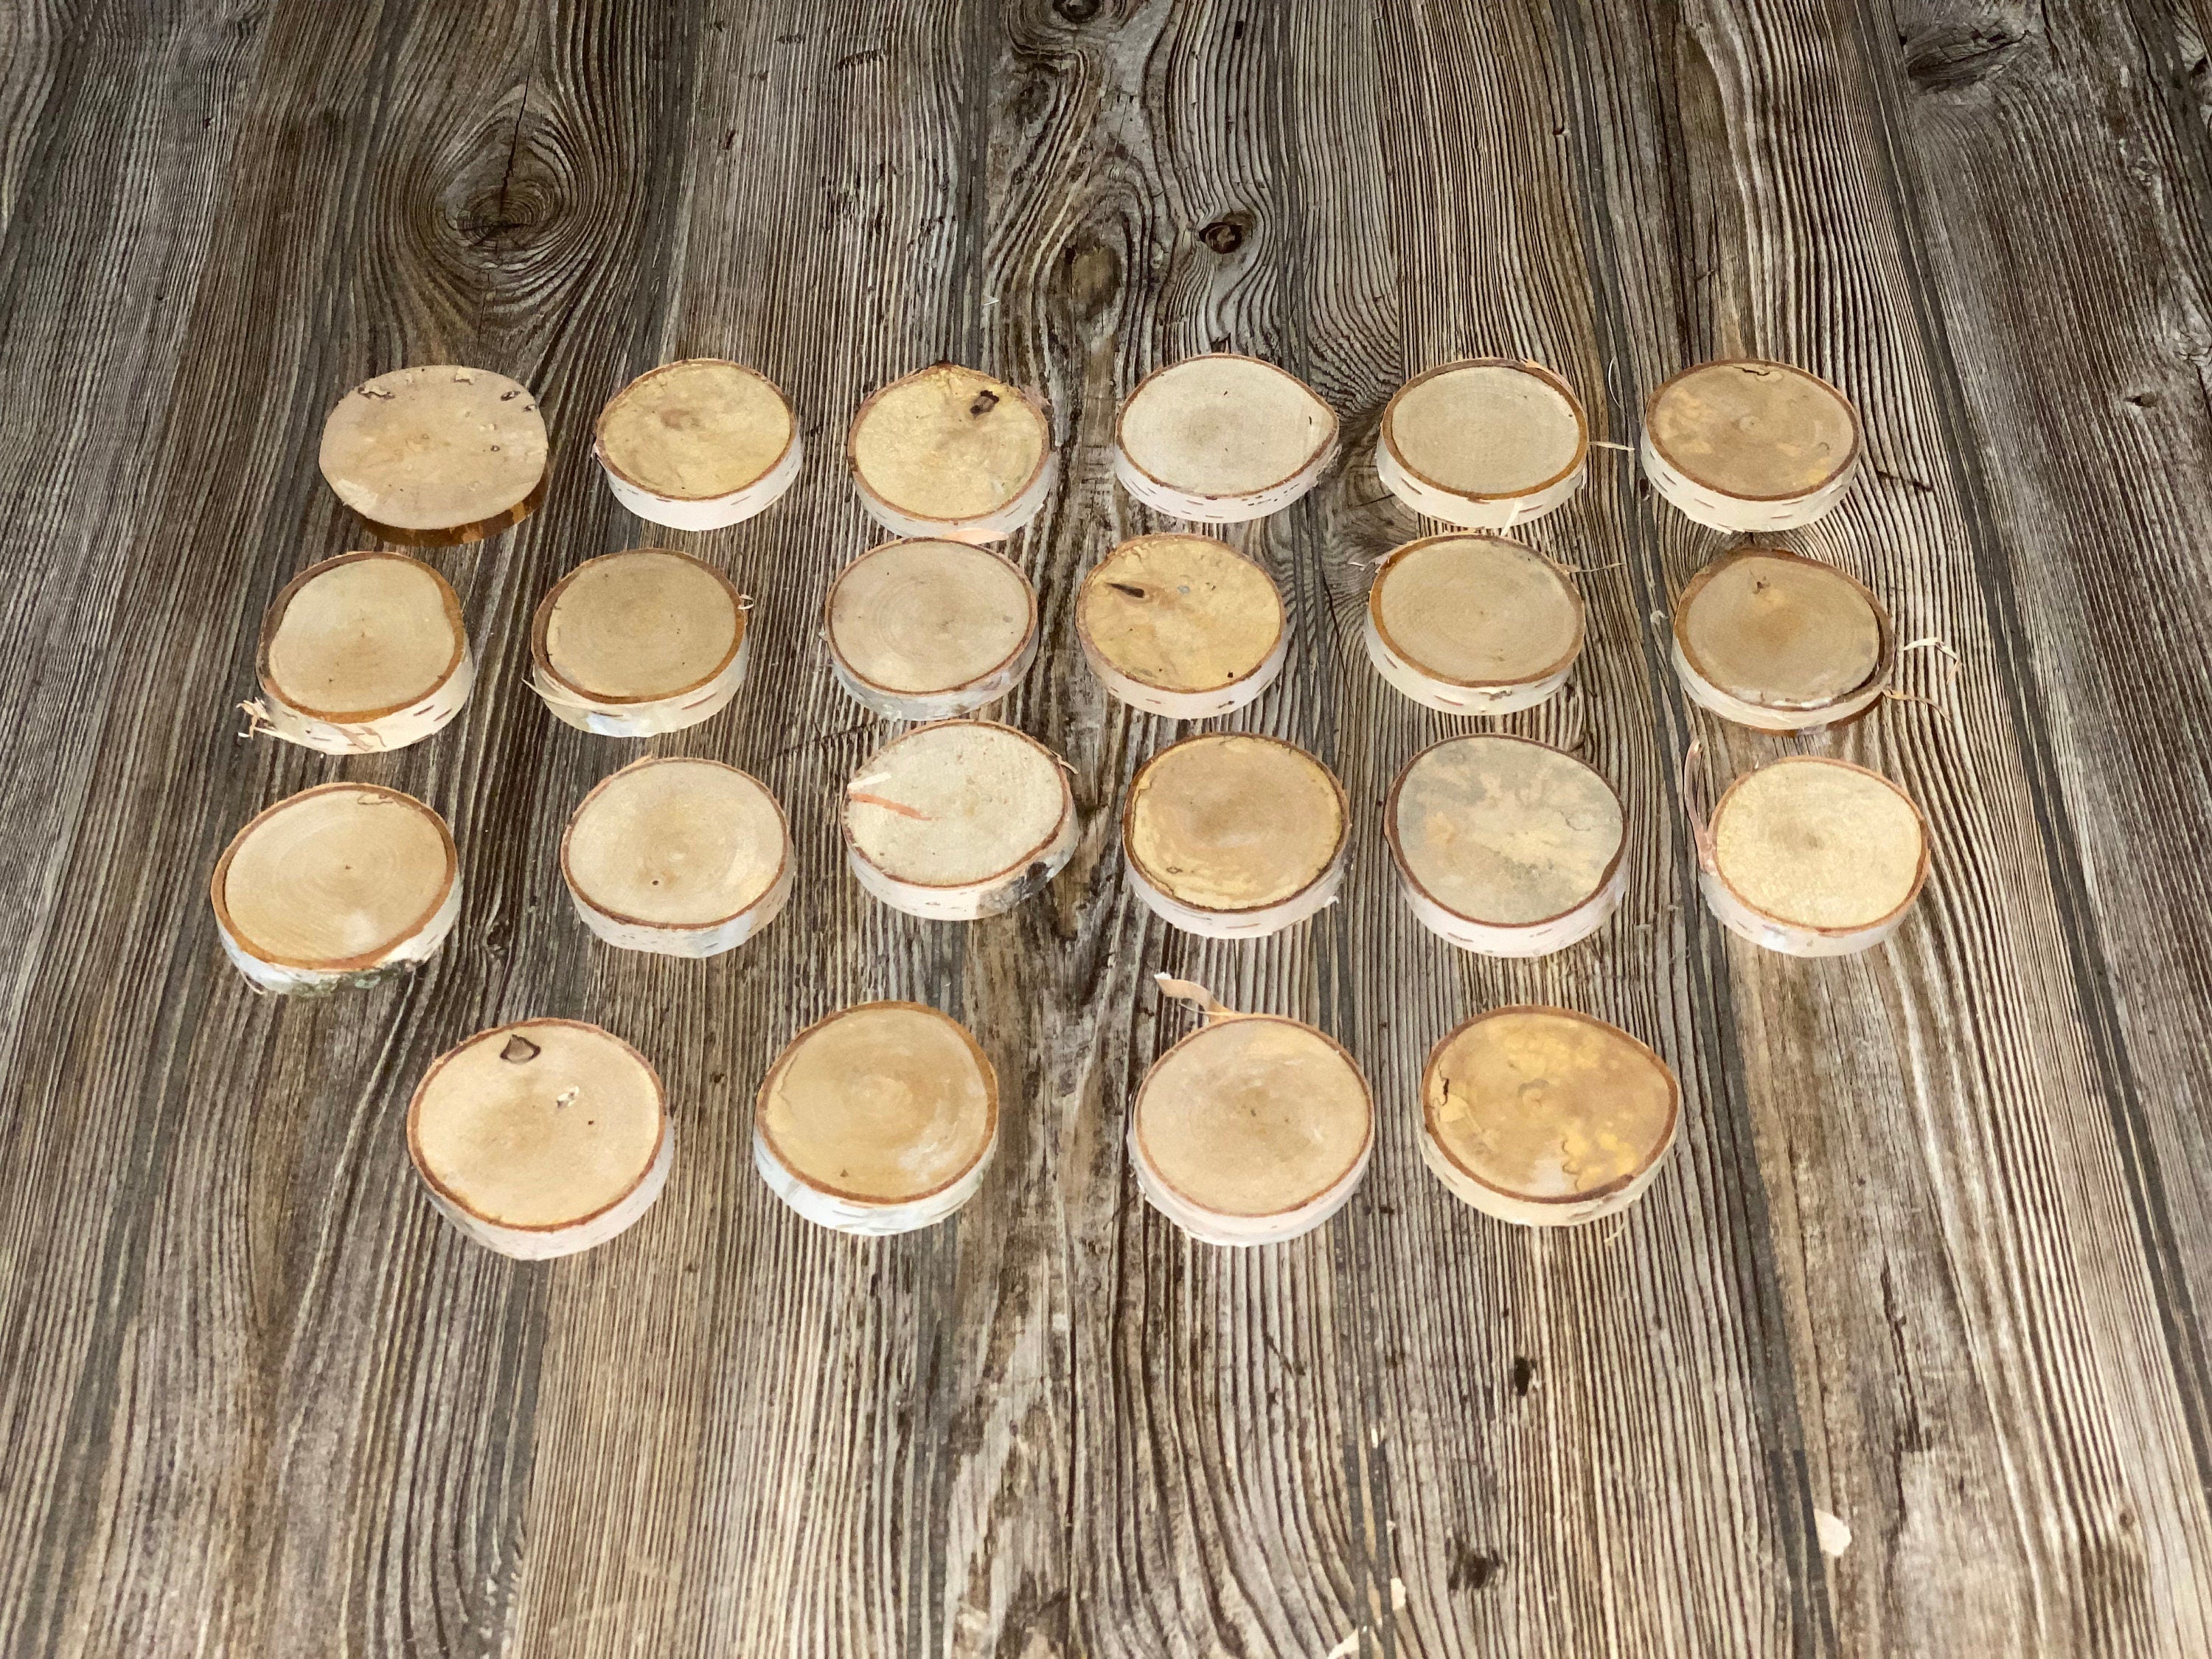 22 White Birch Slices, White Birch Blanks - Approximately 2.5 Inches Diameter by 1/2 Inch Thick